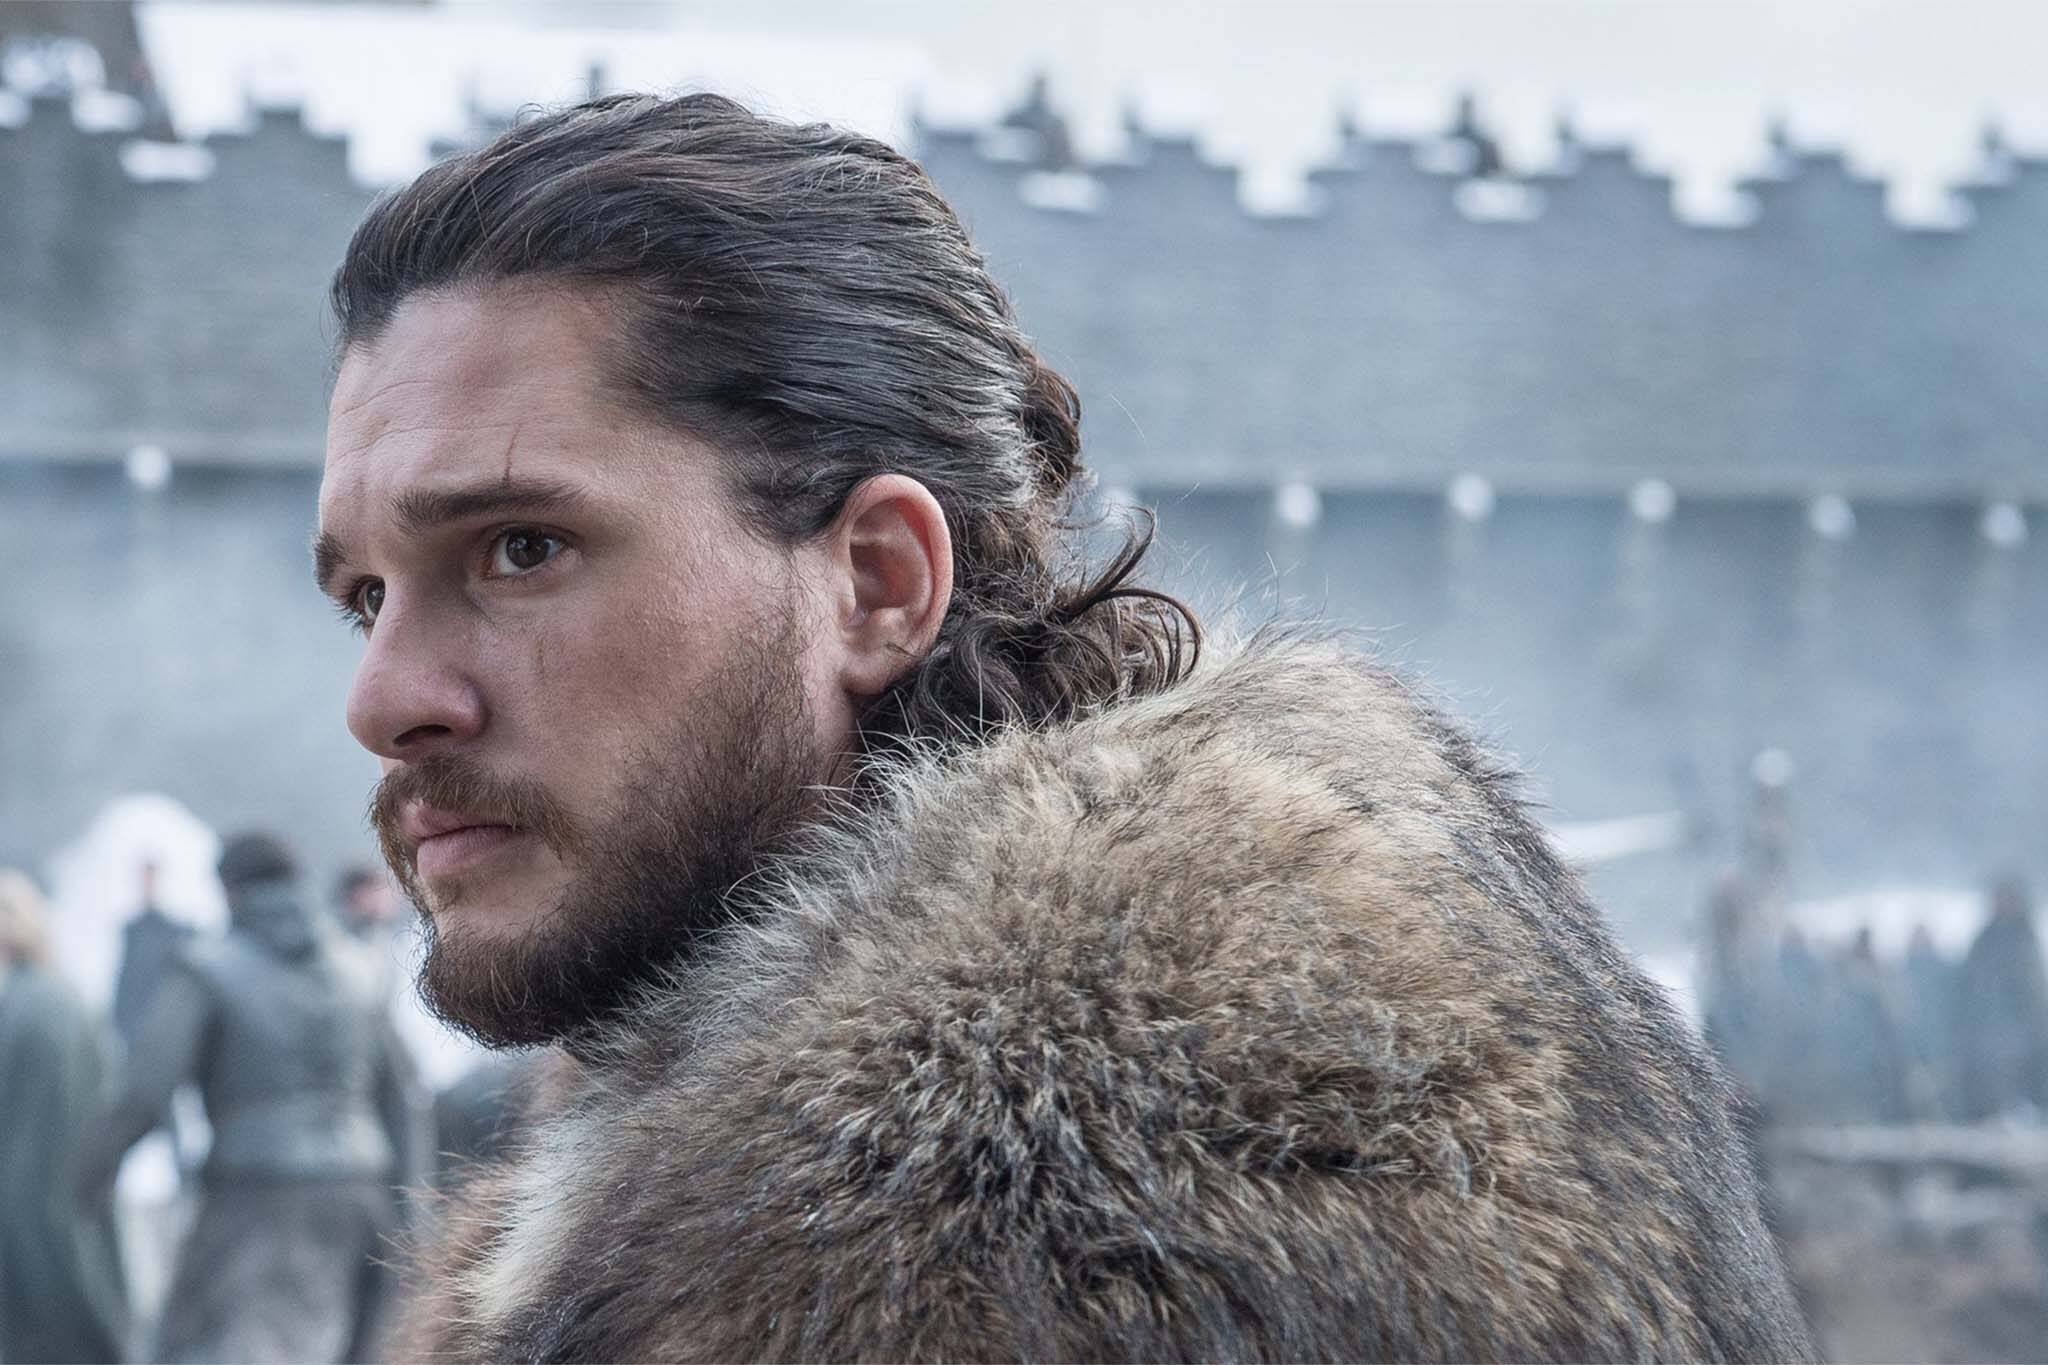 A Game of Thrones concert is coming to Toronto